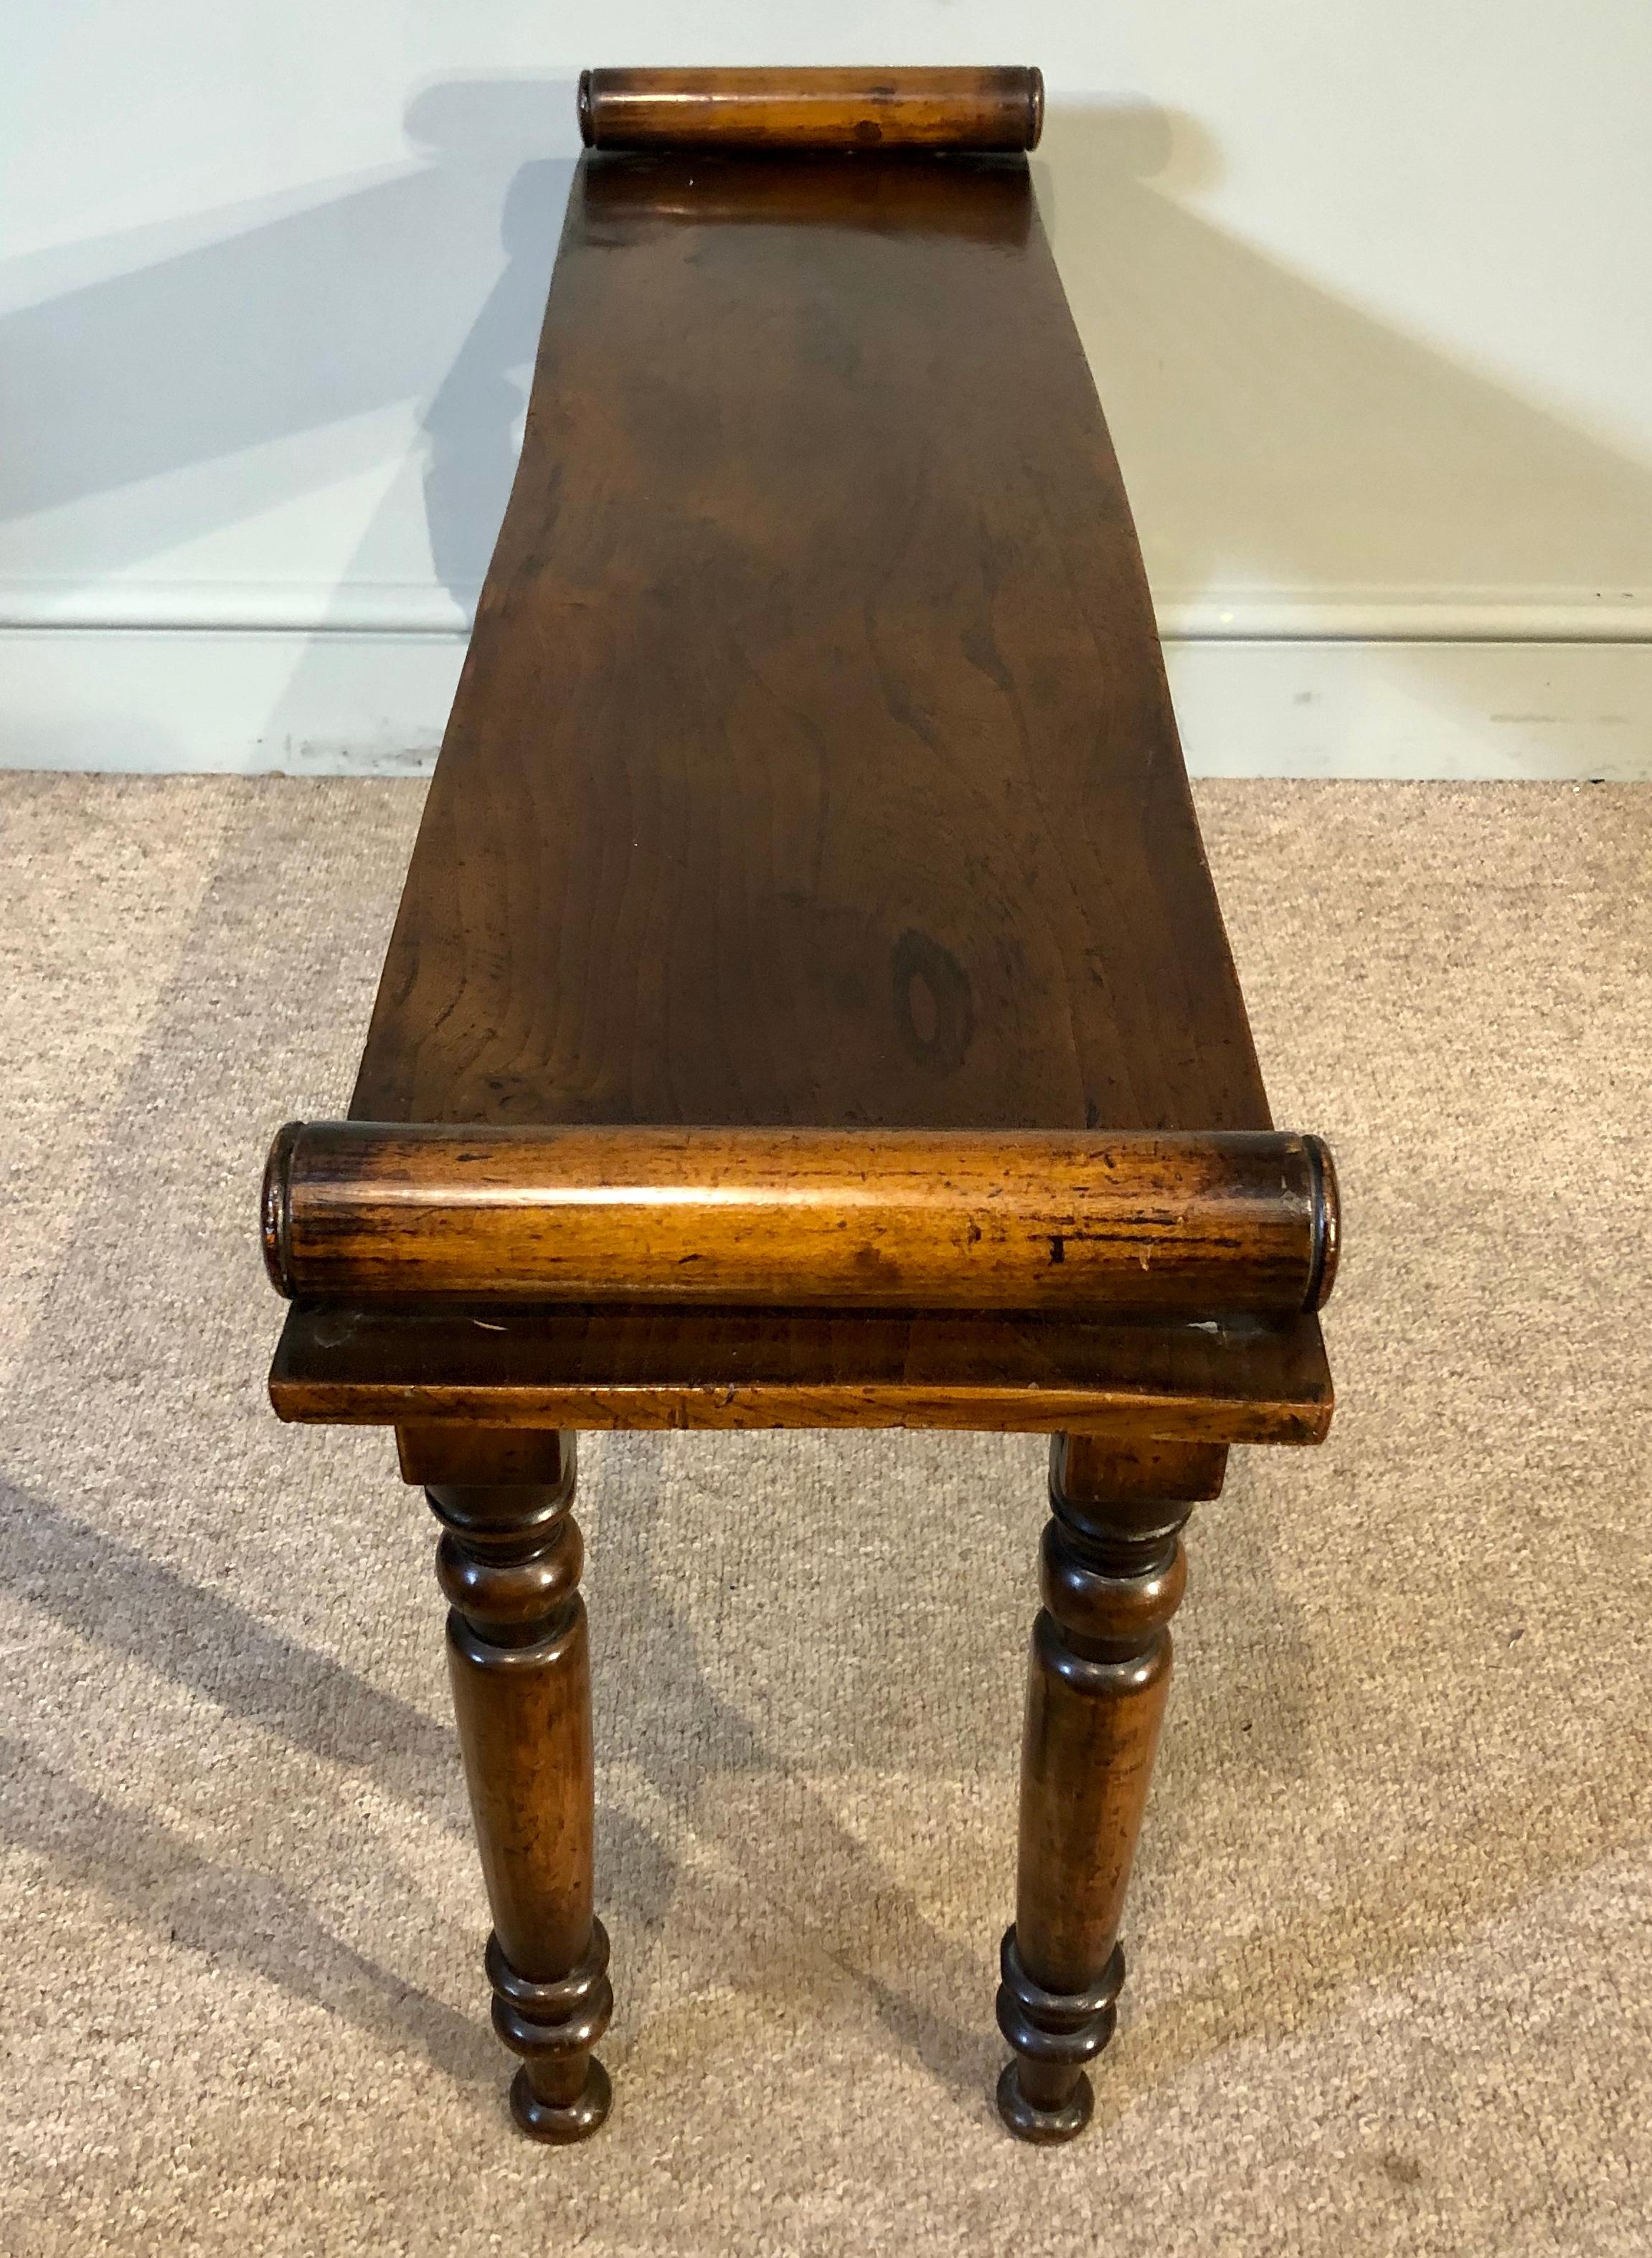 An attractive and well-proportioned Regency style 19th century mahogany and elm window seat. The beautifully figured elm seat top having scrolls at each end, standing on four turned mahogany legs. Works perfectly at the end of a bed, or as a window